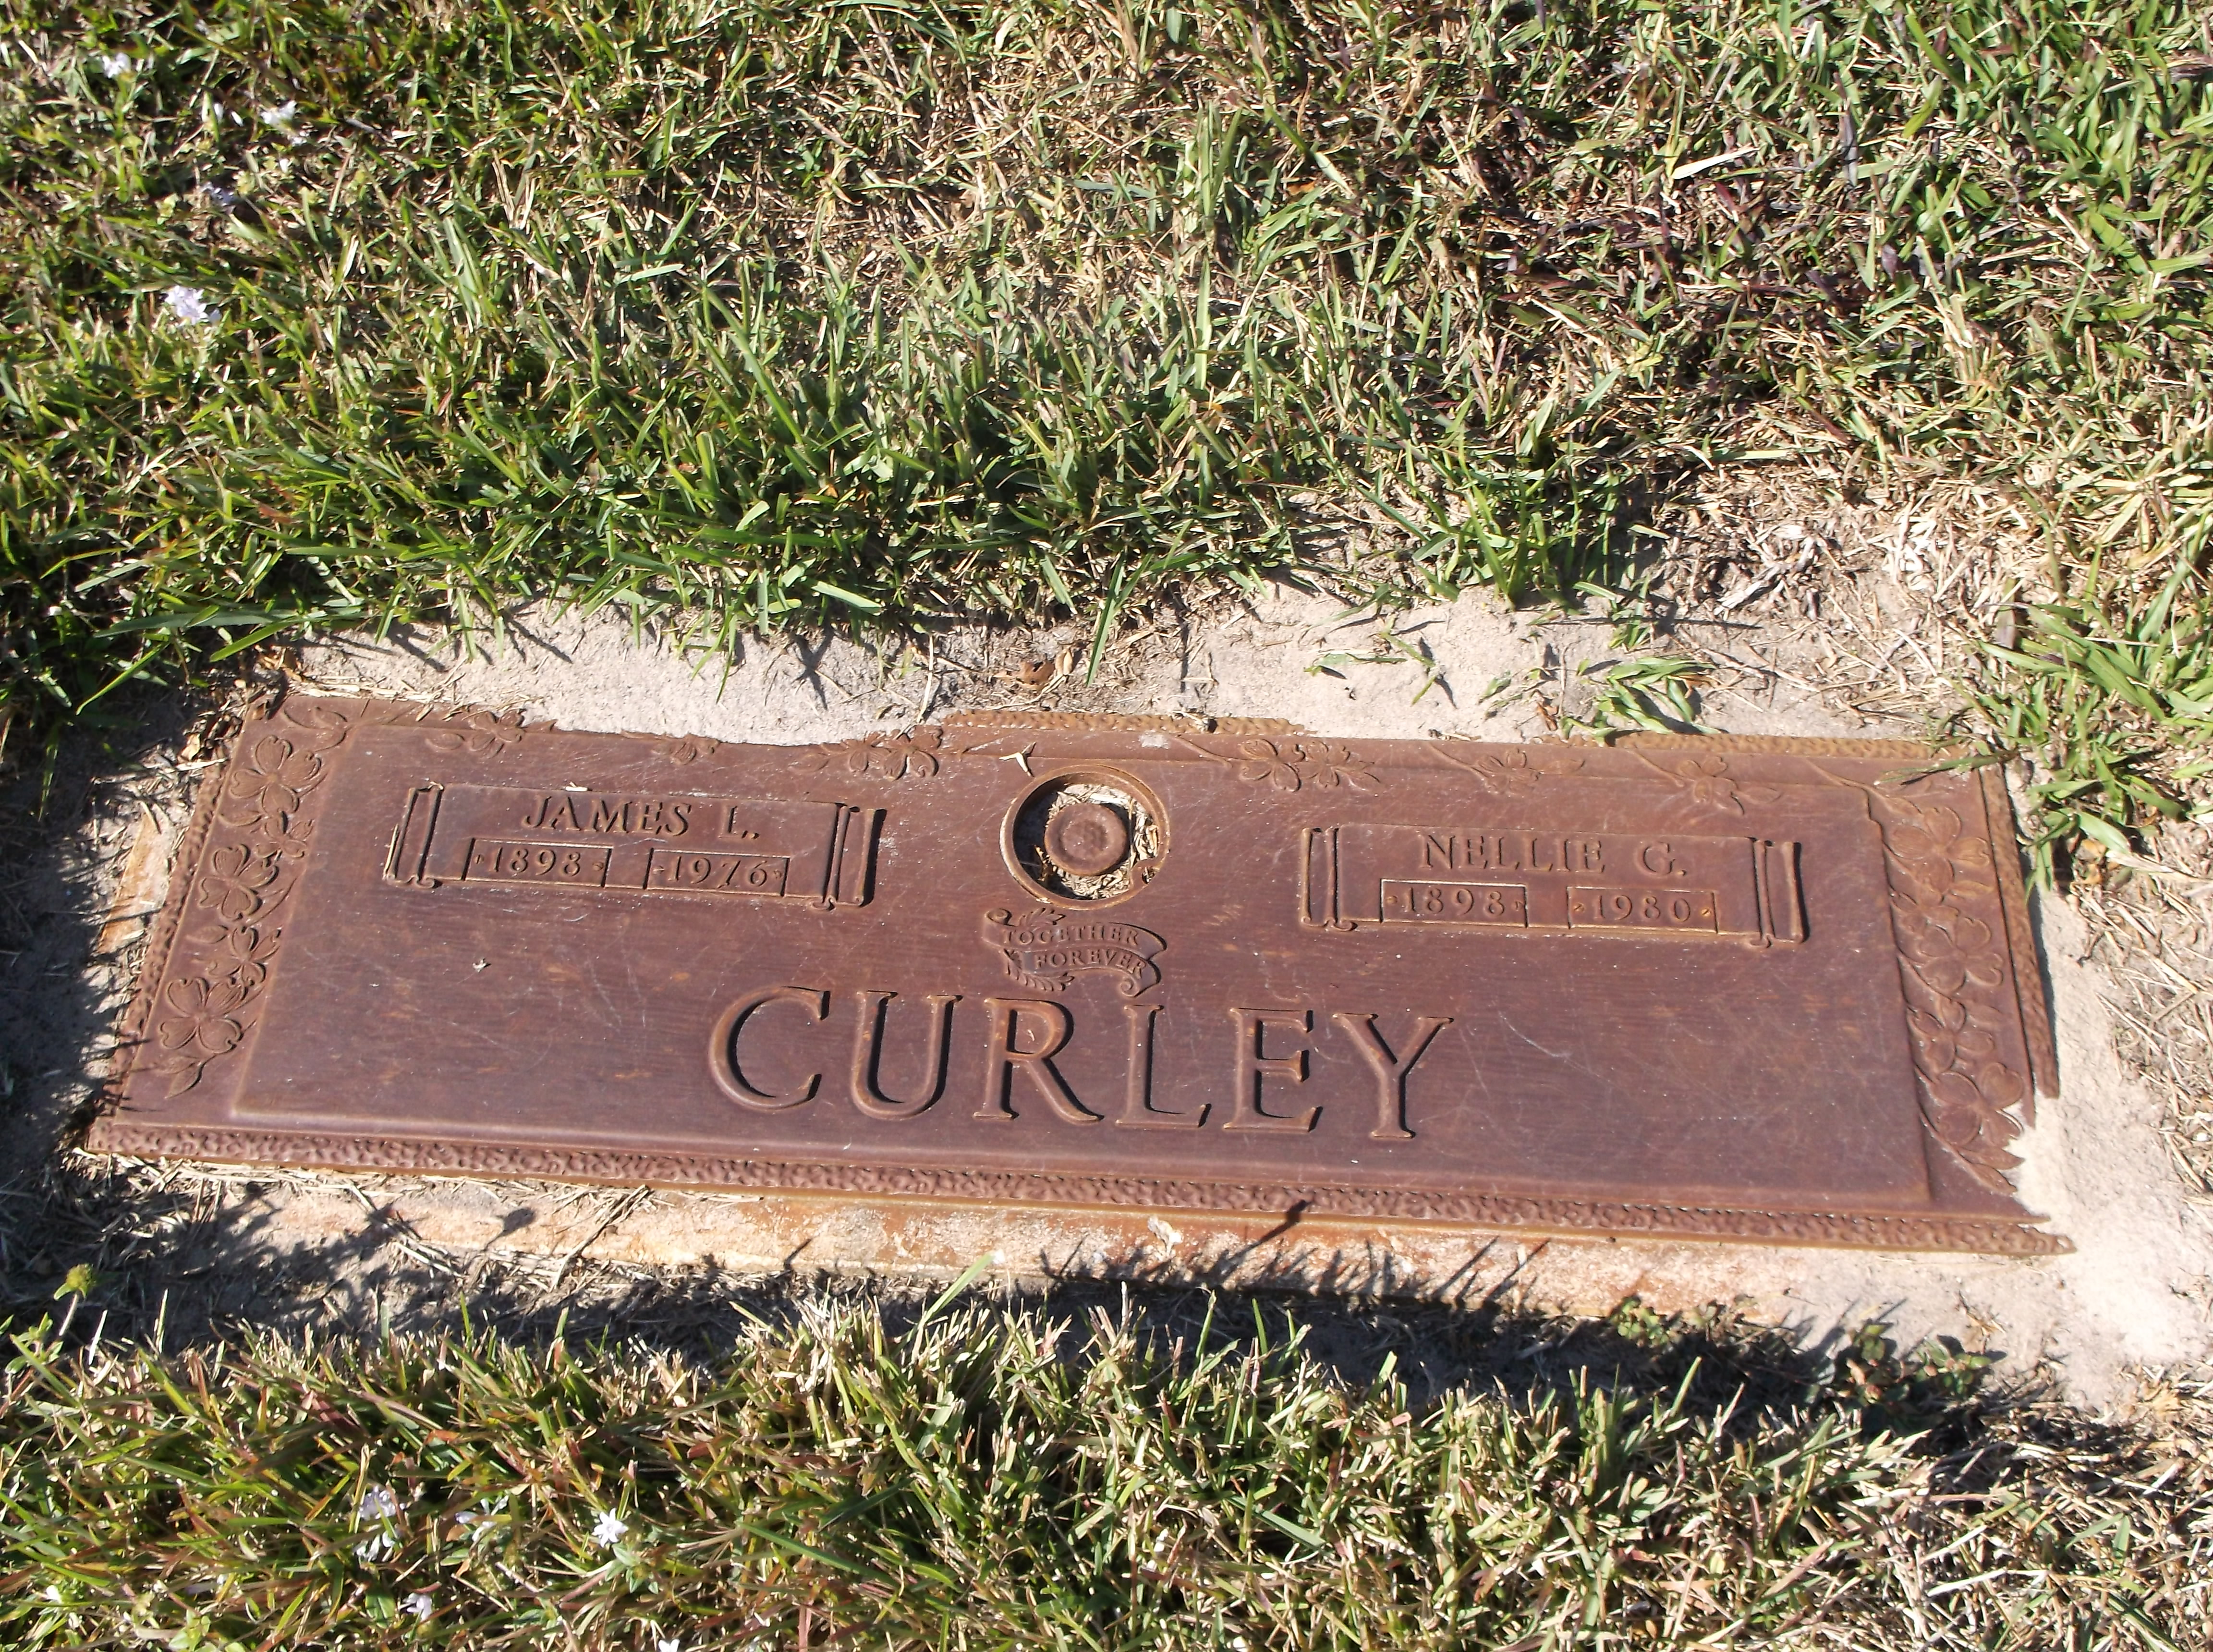 Nellie G Curley